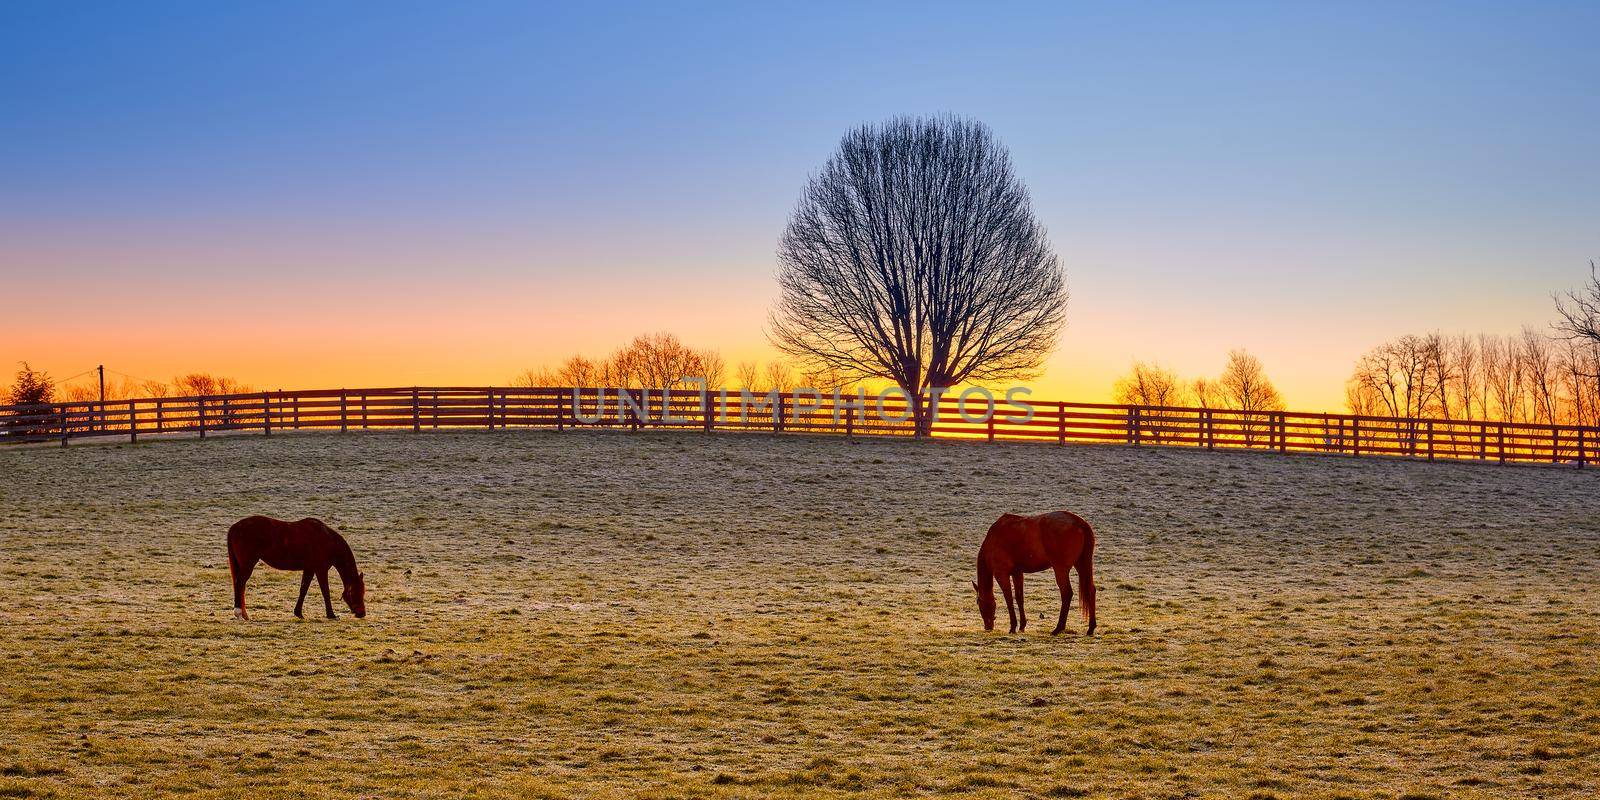 Two thoroughbred horses grazing at sunrise in a field.